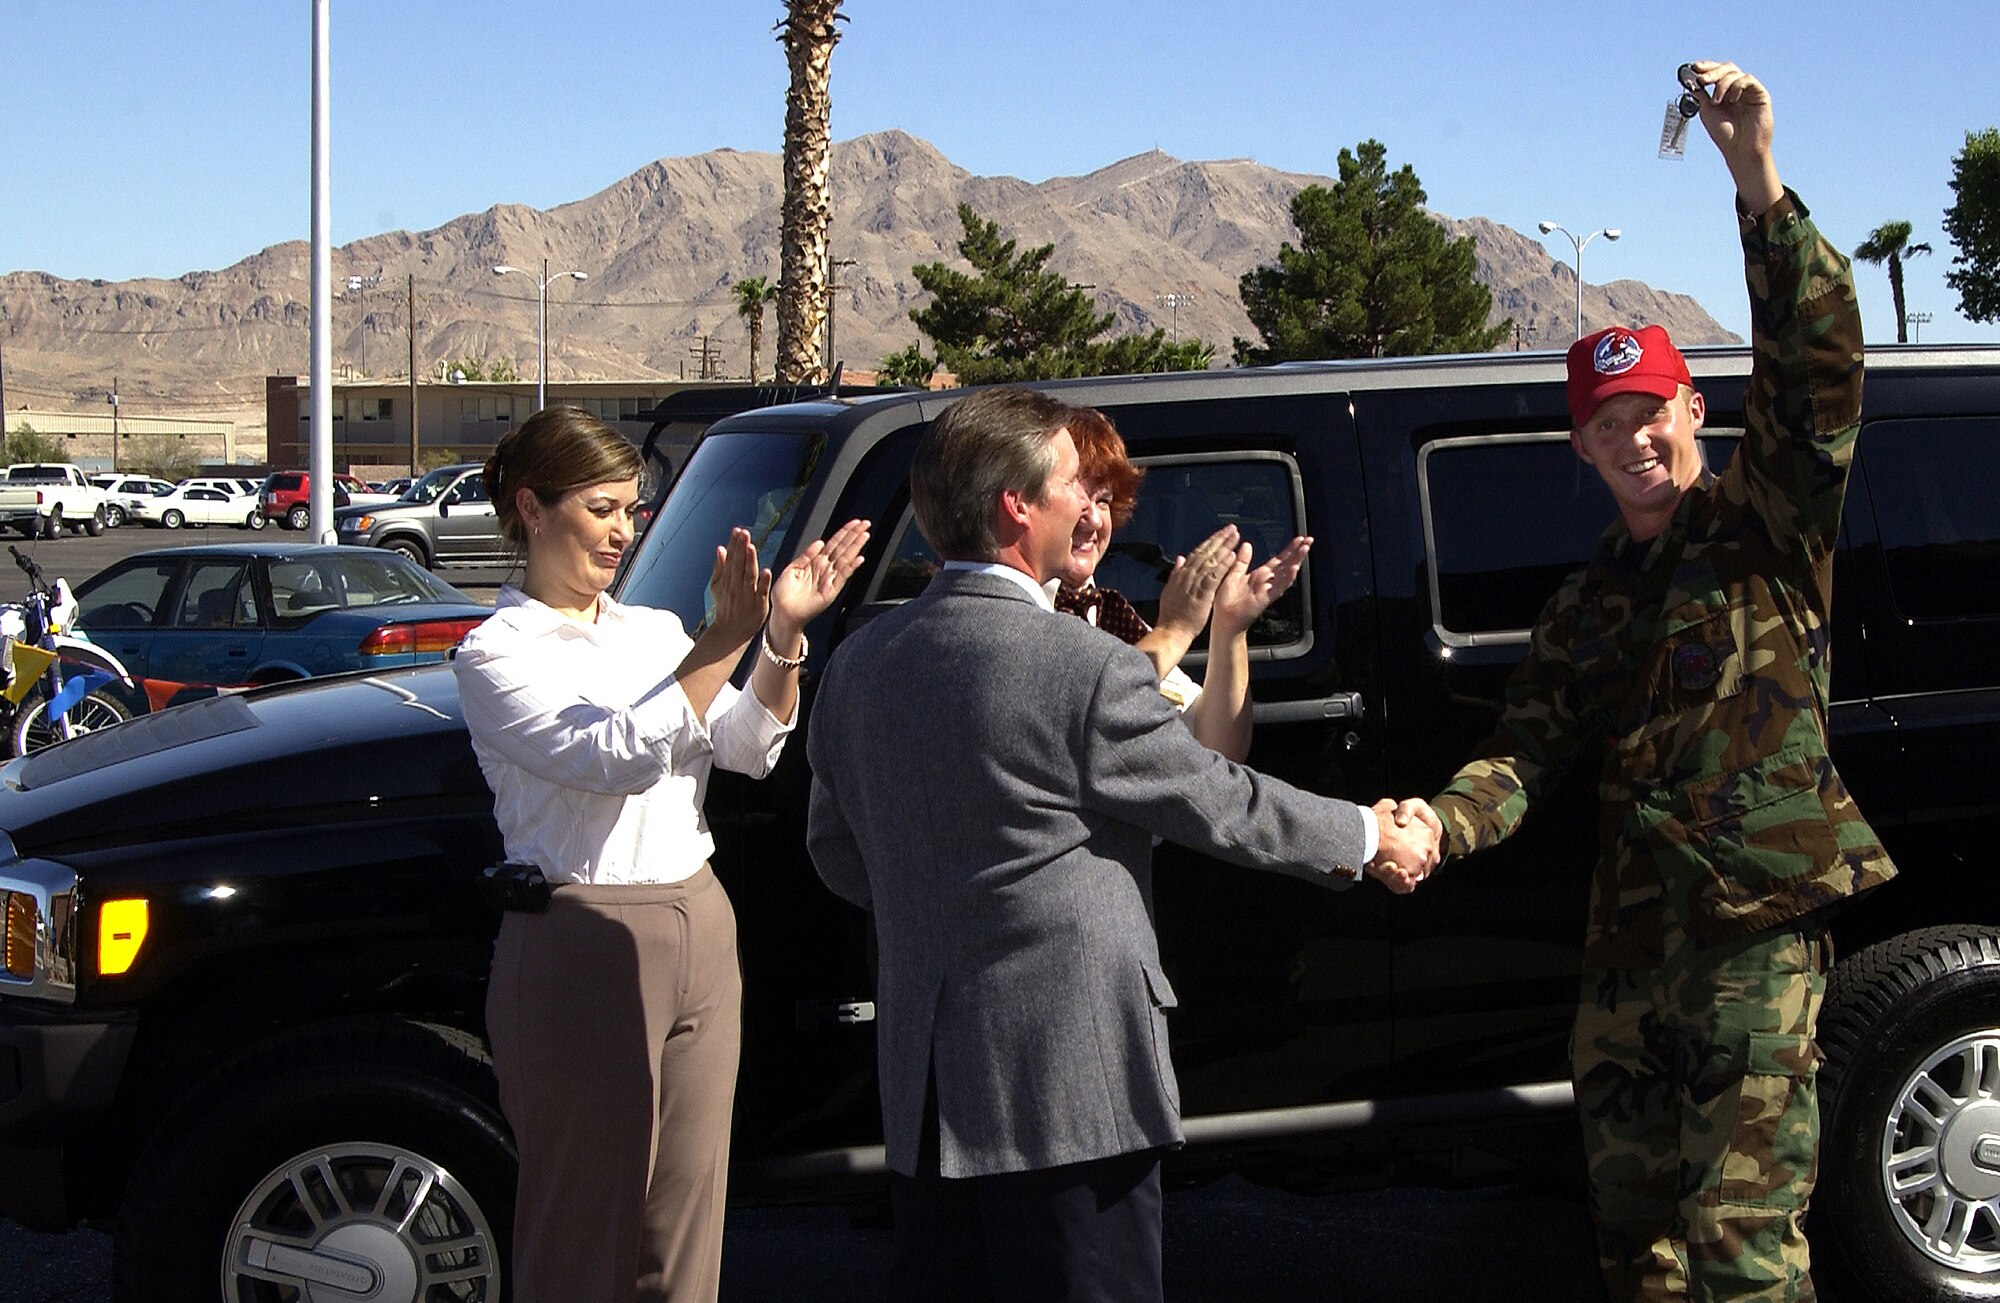 Senior Airman Daniel O'Conner, 820th RED HORSE Squadron, receives the keys to a brand new 2006 Hummer H3 Oct. 7 at Nellis Air Force Base, Nev.  Airman O'Conner won the H3 in Burger King's worldwide General Adventure Sweepstakes.  The contest was held in 202 Burger King stores on military installations in the U.S., the Pacific and Europe. The two other winners were in Japan and England.  RED HORSE is a highly mobile, self-sufficient combat construction unit capable of extended operations in a hostile environment. (U.S. Air Force photo/Airman 1st Class Jeffery Hall)                             